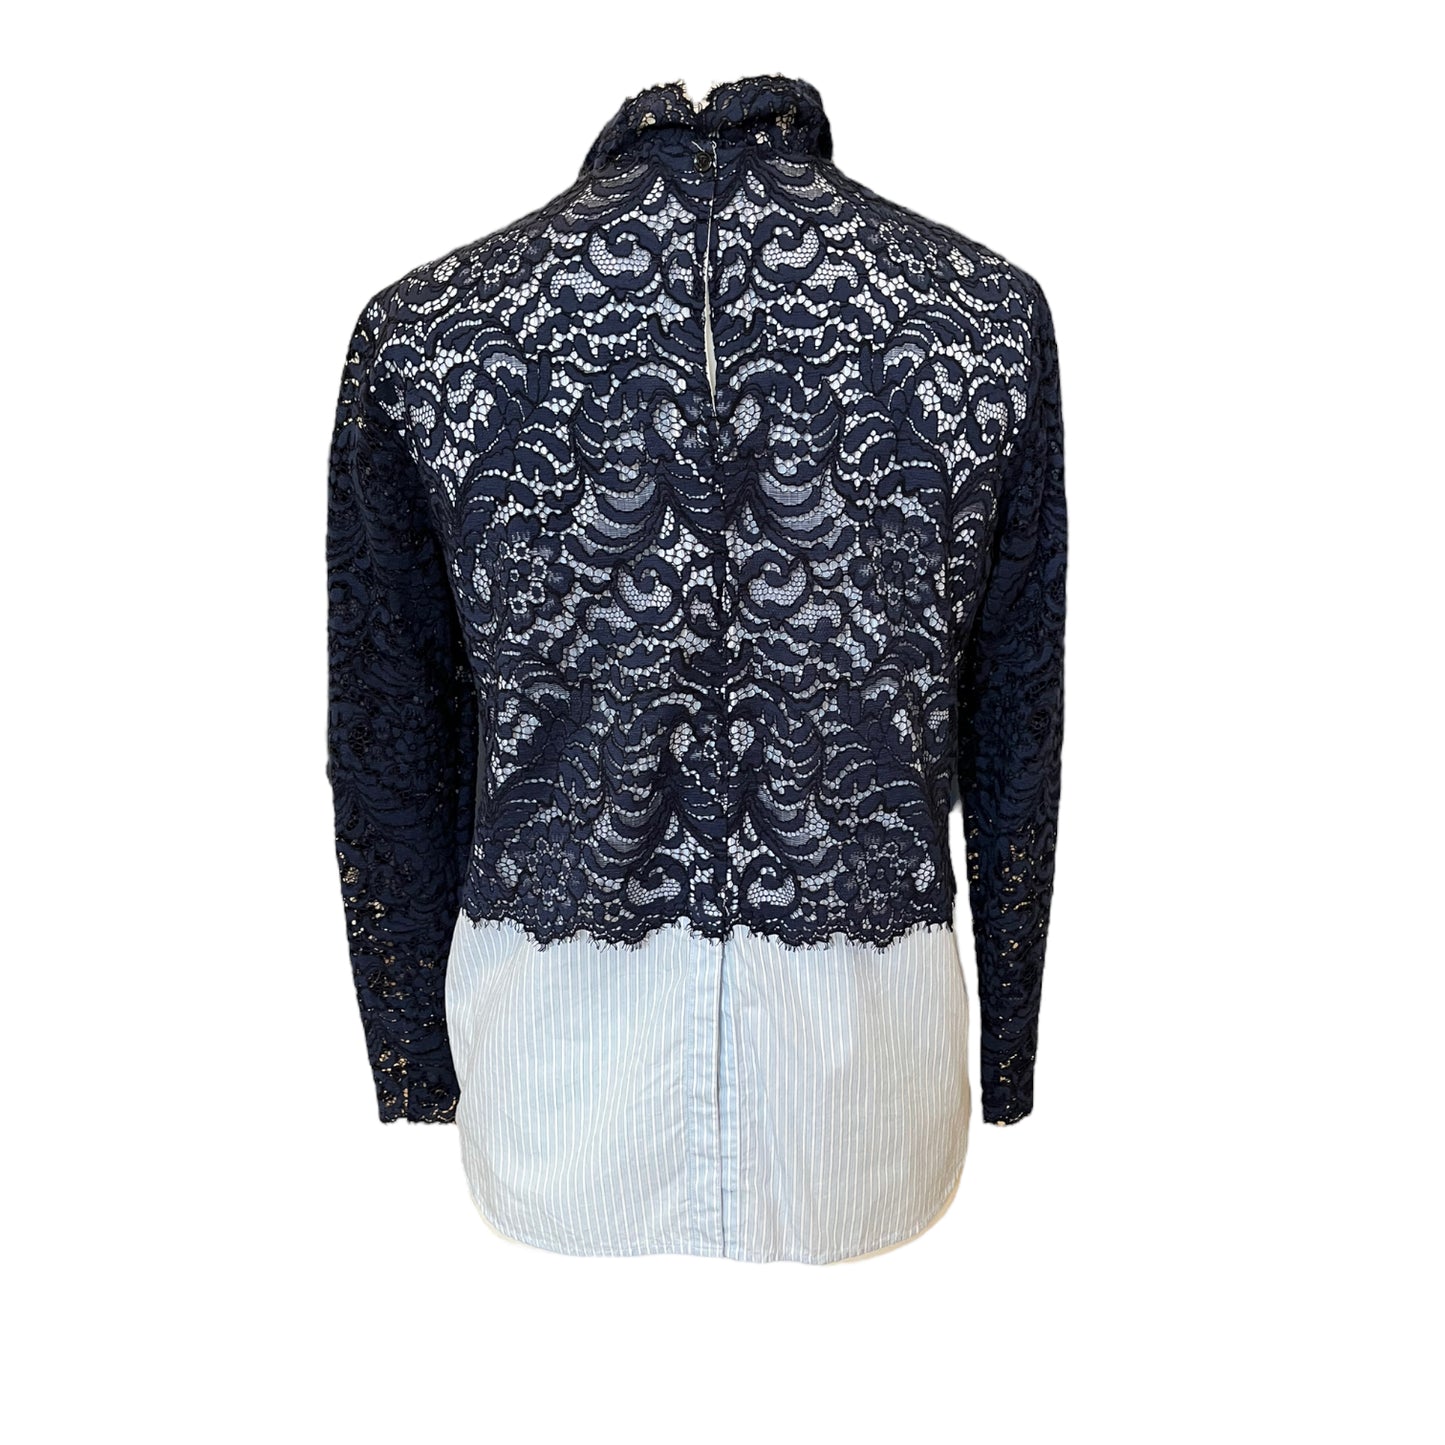 Sandro Blue Shirt with Navy Lace Overlay